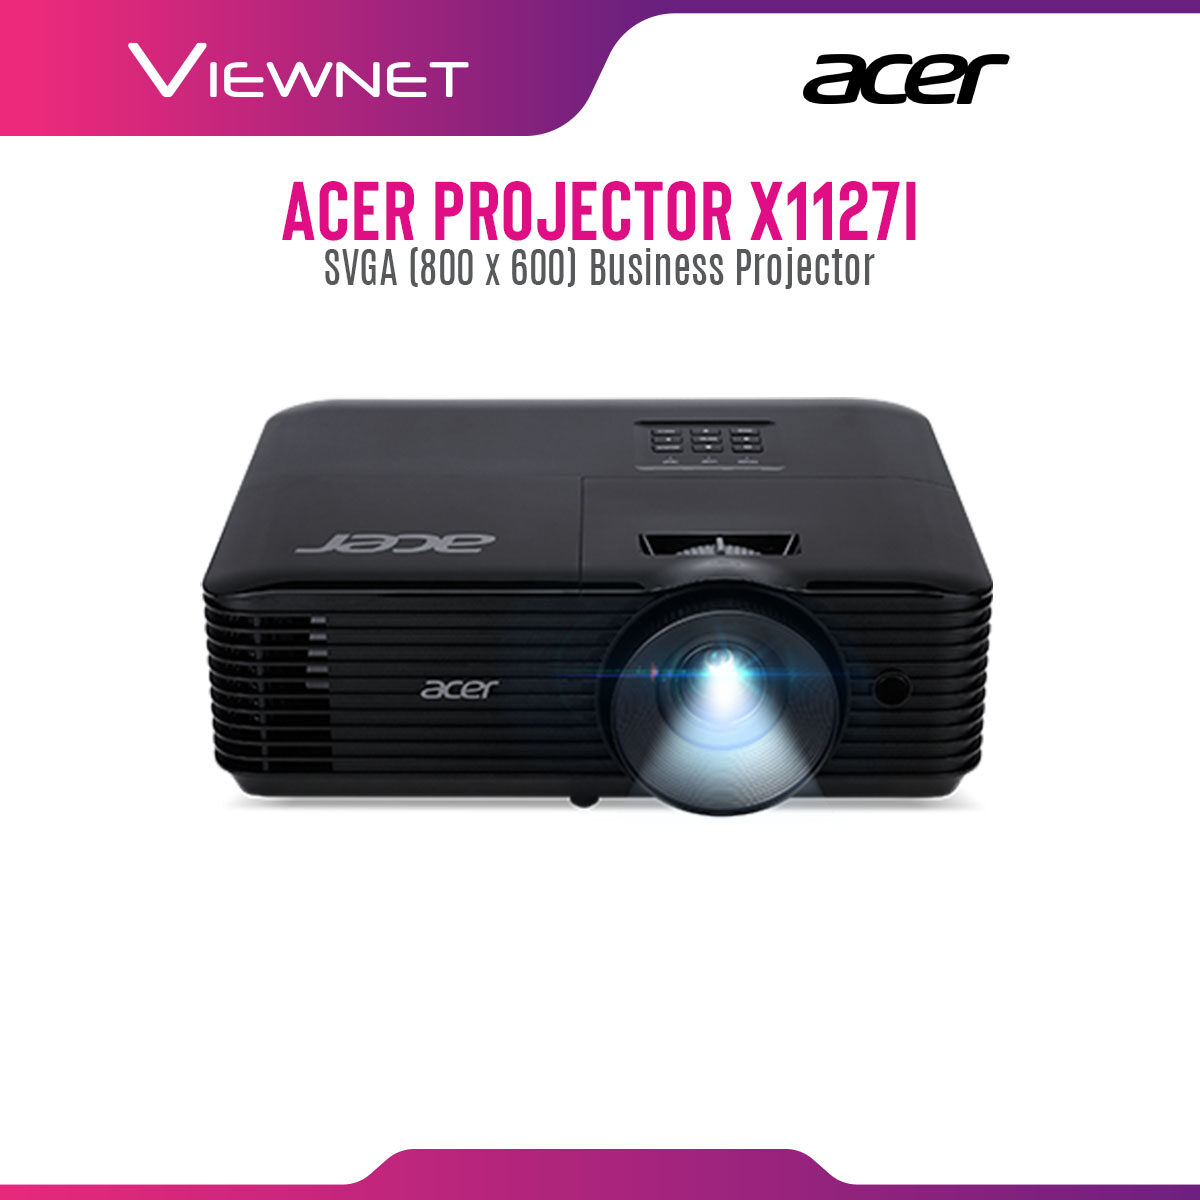 Acer Projector X1127i with SVGA (800x600) Resolution, 4000 Ansi Lumens, 20,000 : 1 Contrast Ratio, Eco Mode 15,000 Hour Lamp Life, HDMI and VGA Support